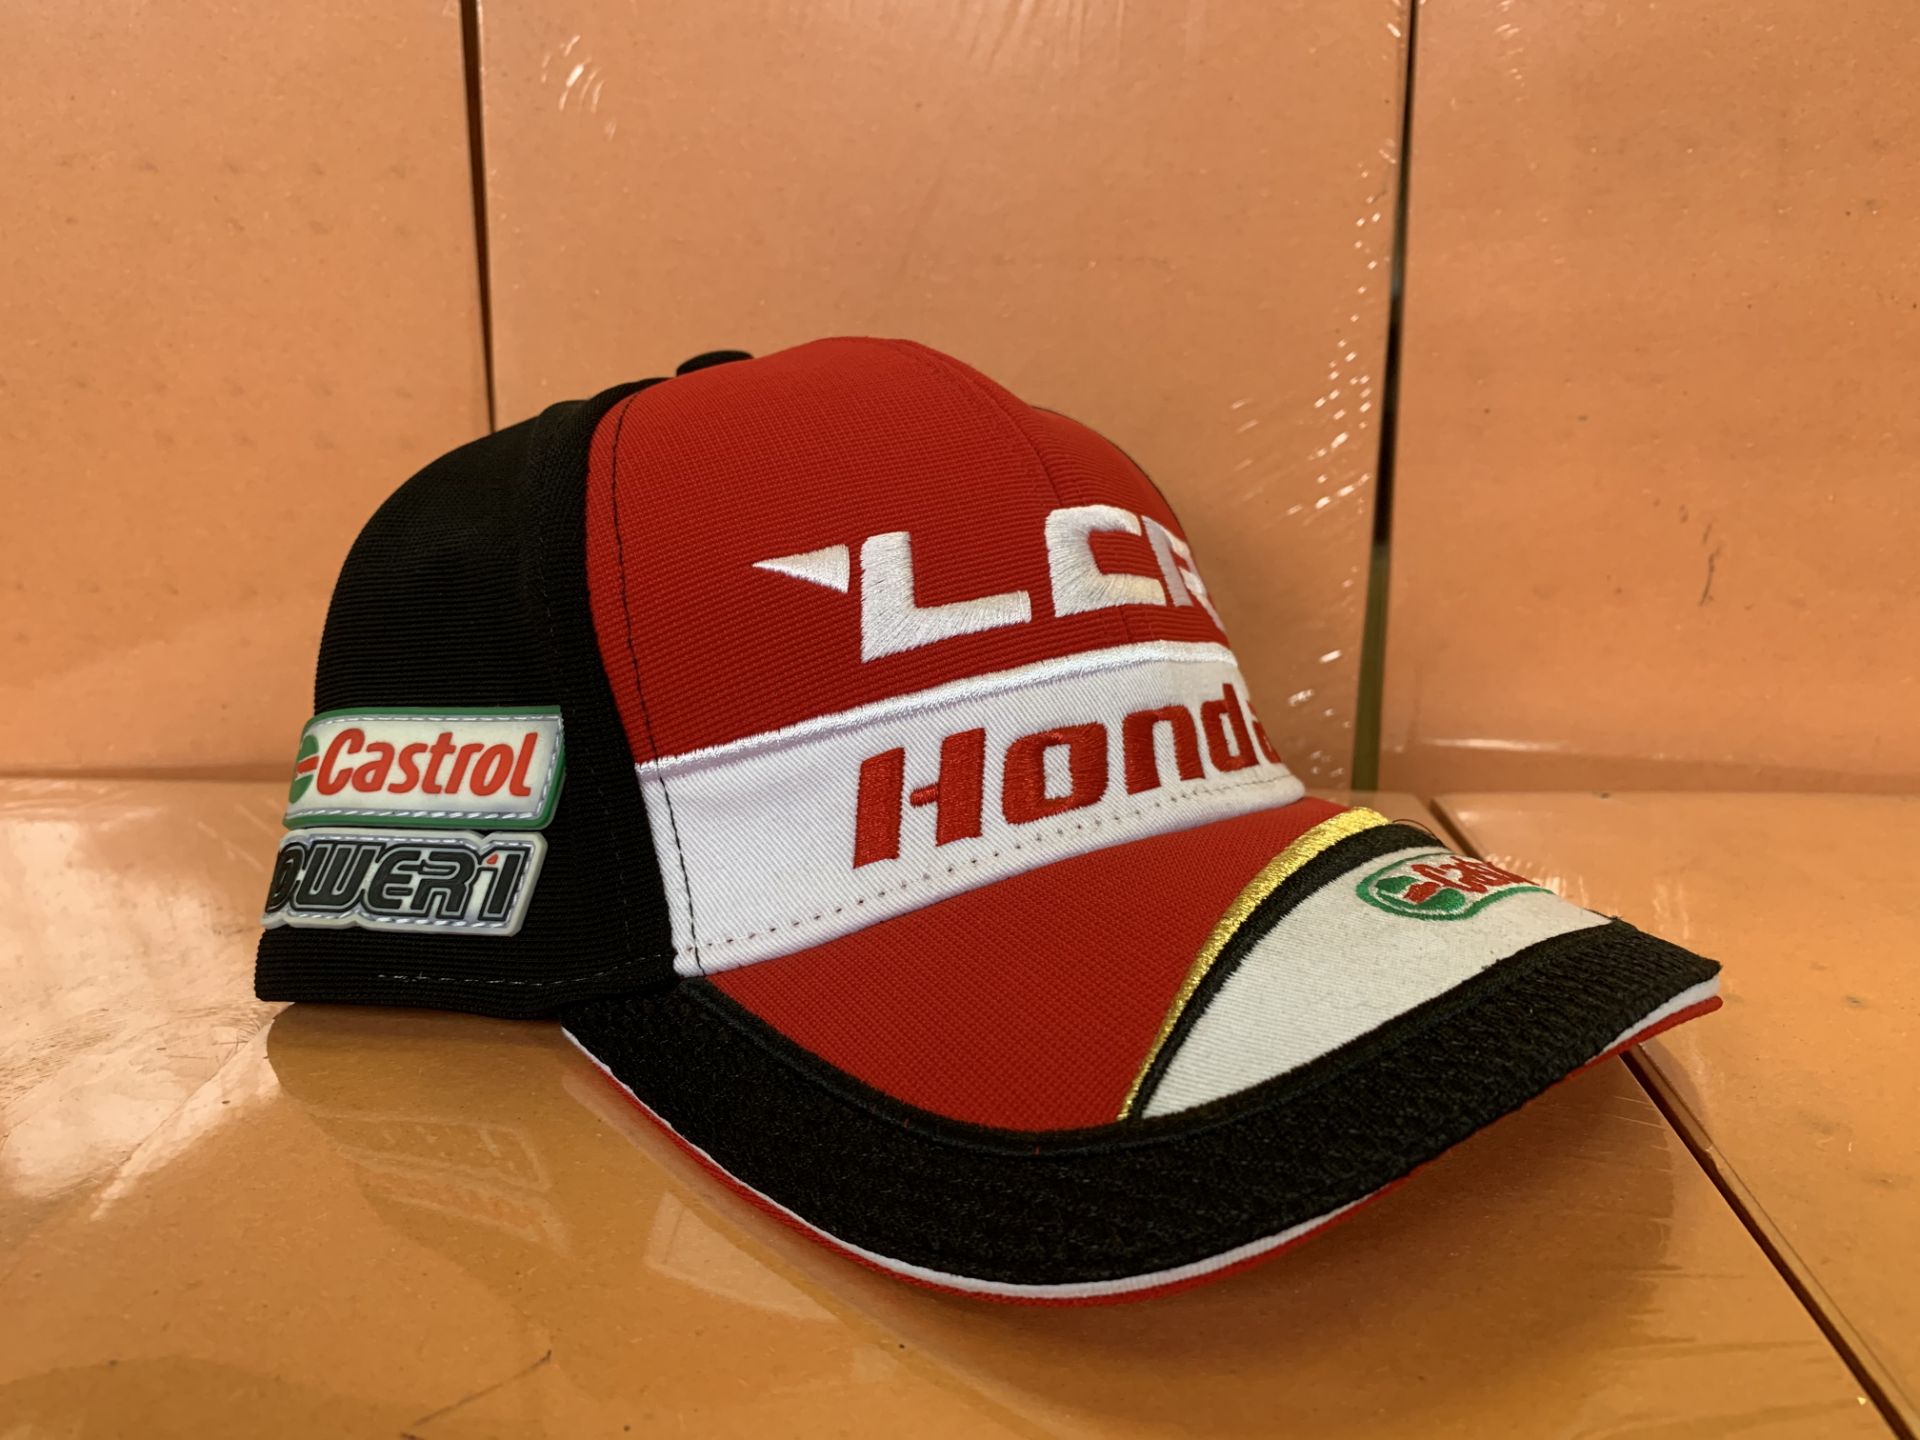 25 X BRAND NEW OFFICIAL HONDA LCR CAPS